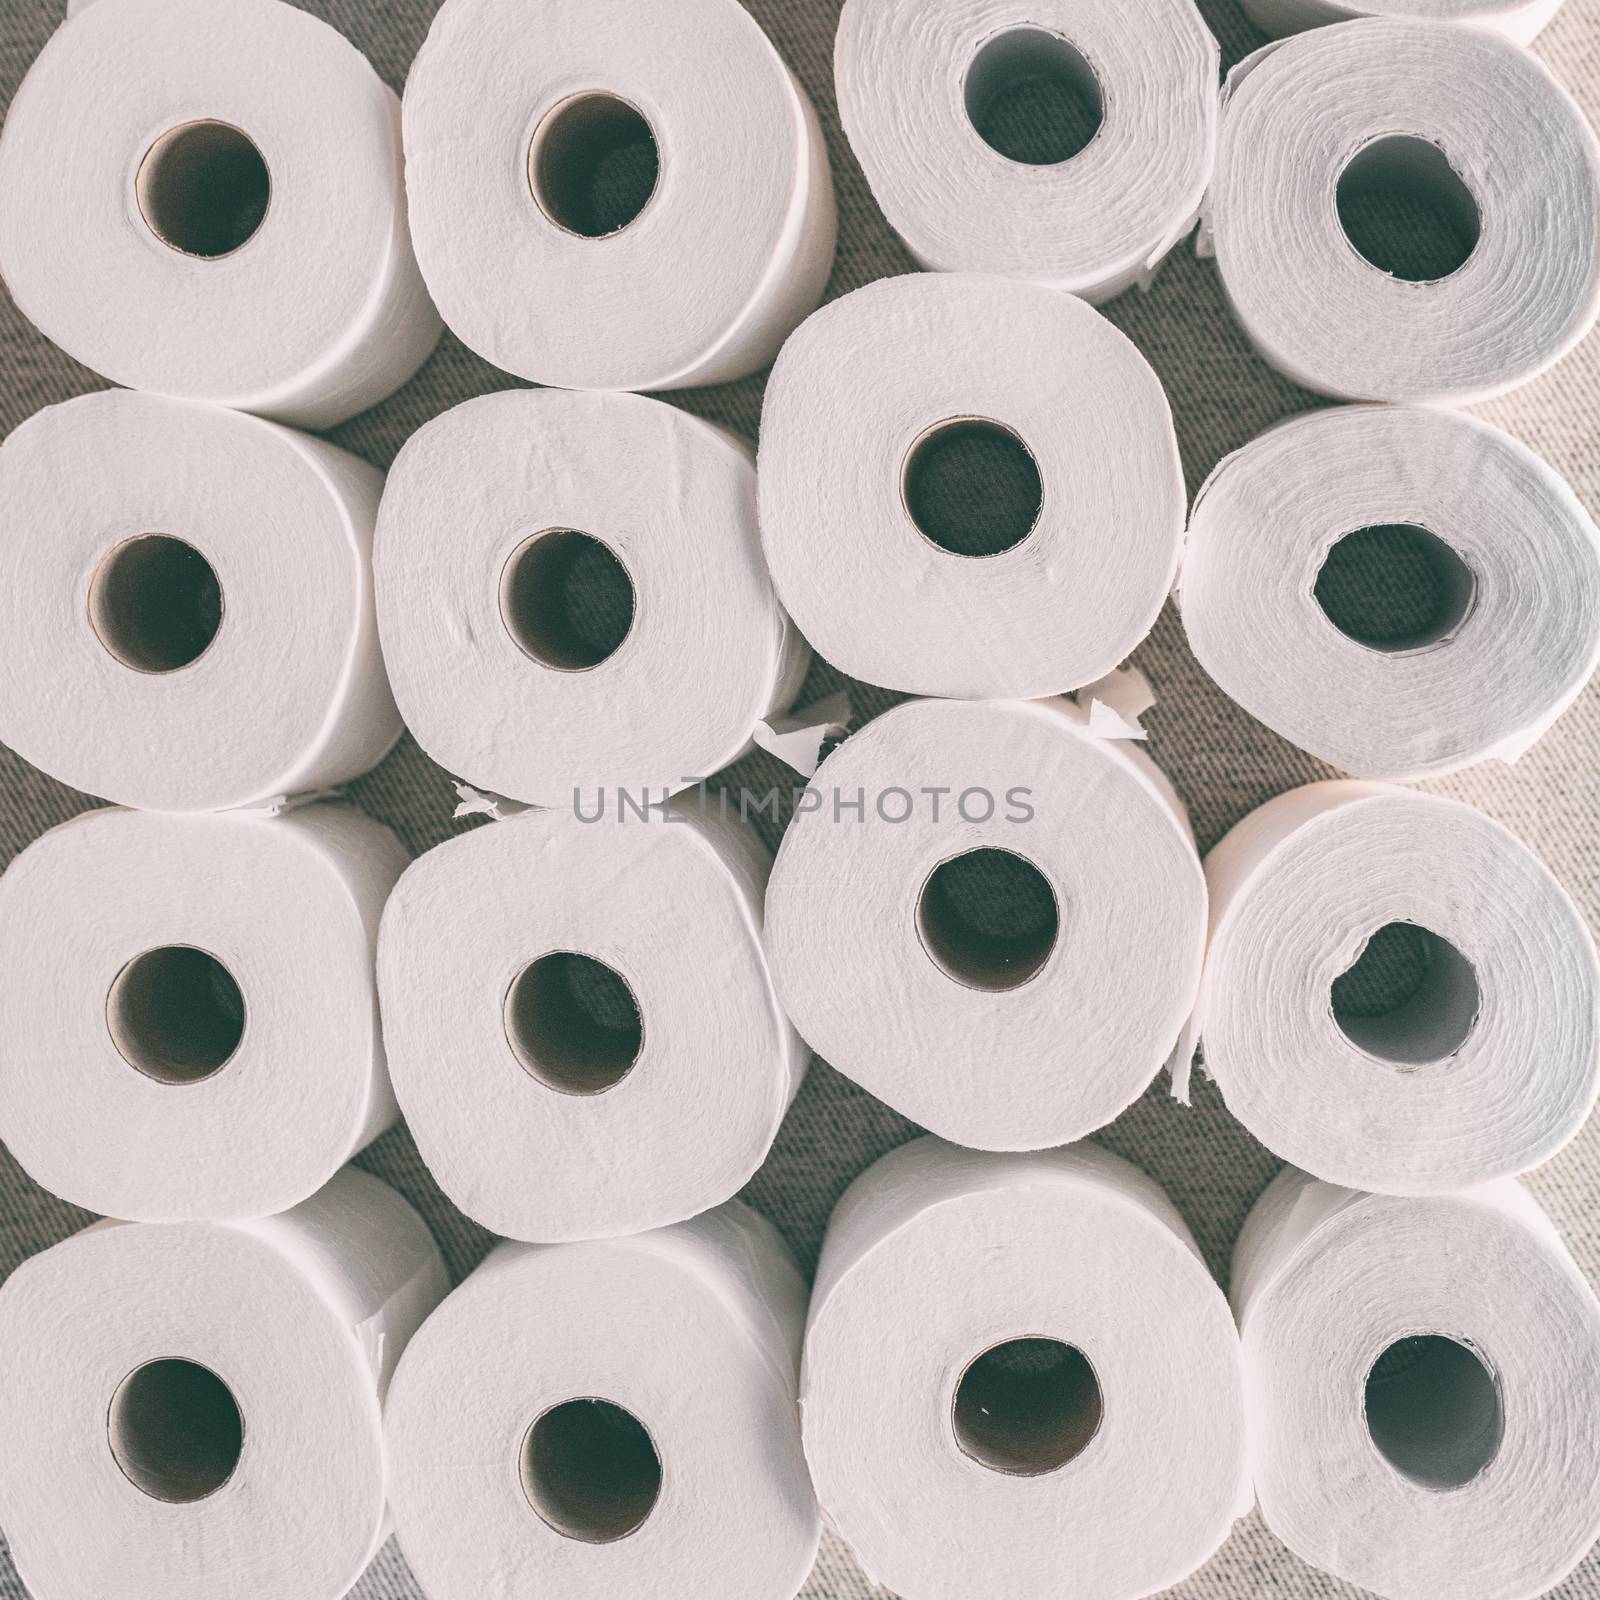 Toilet paper rolls background top flat view of many open rolls, square crop by Maridav